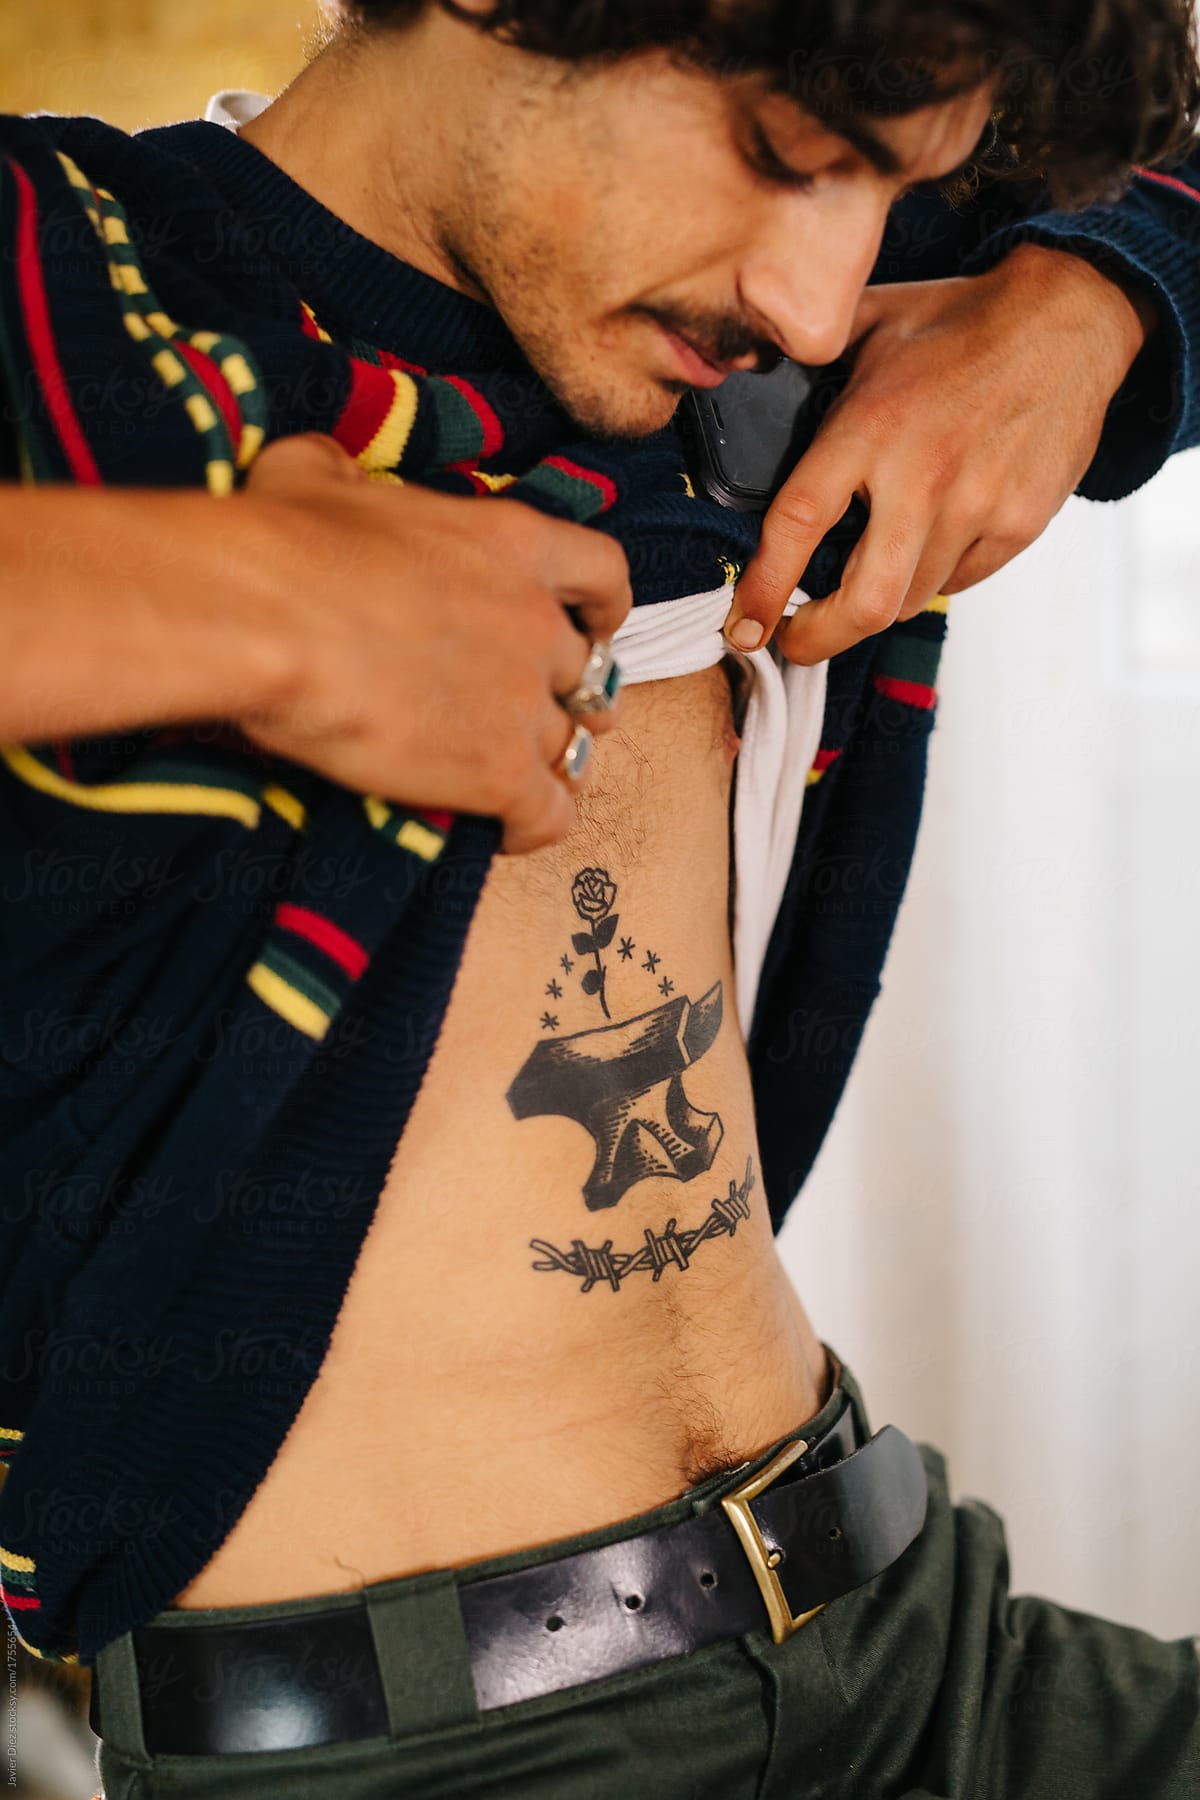 Shiite tattoos are showing pride amid tensions | Chattanooga Times Free  Press